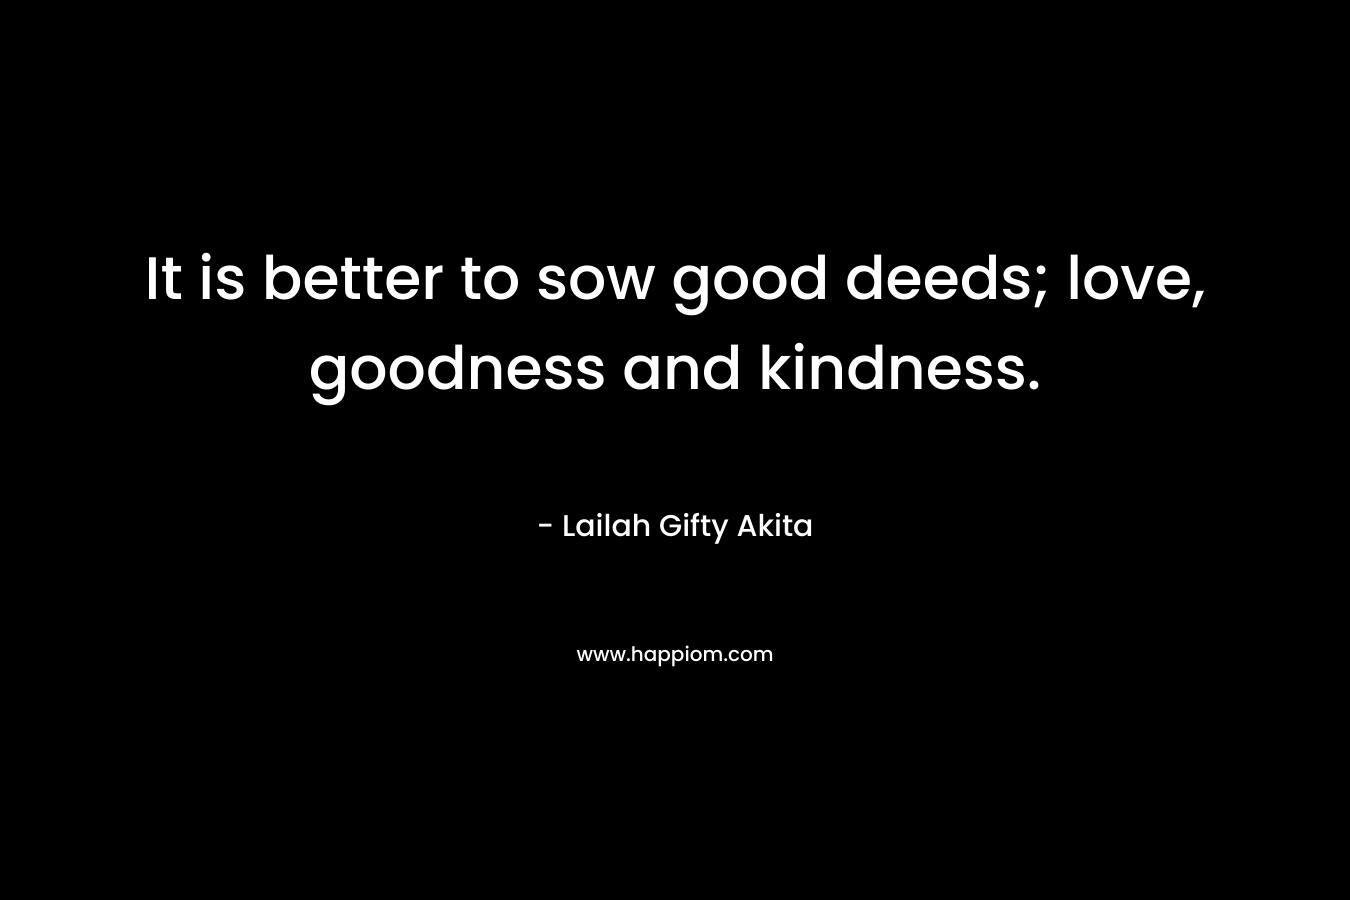 It is better to sow good deeds; love, goodness and kindness.